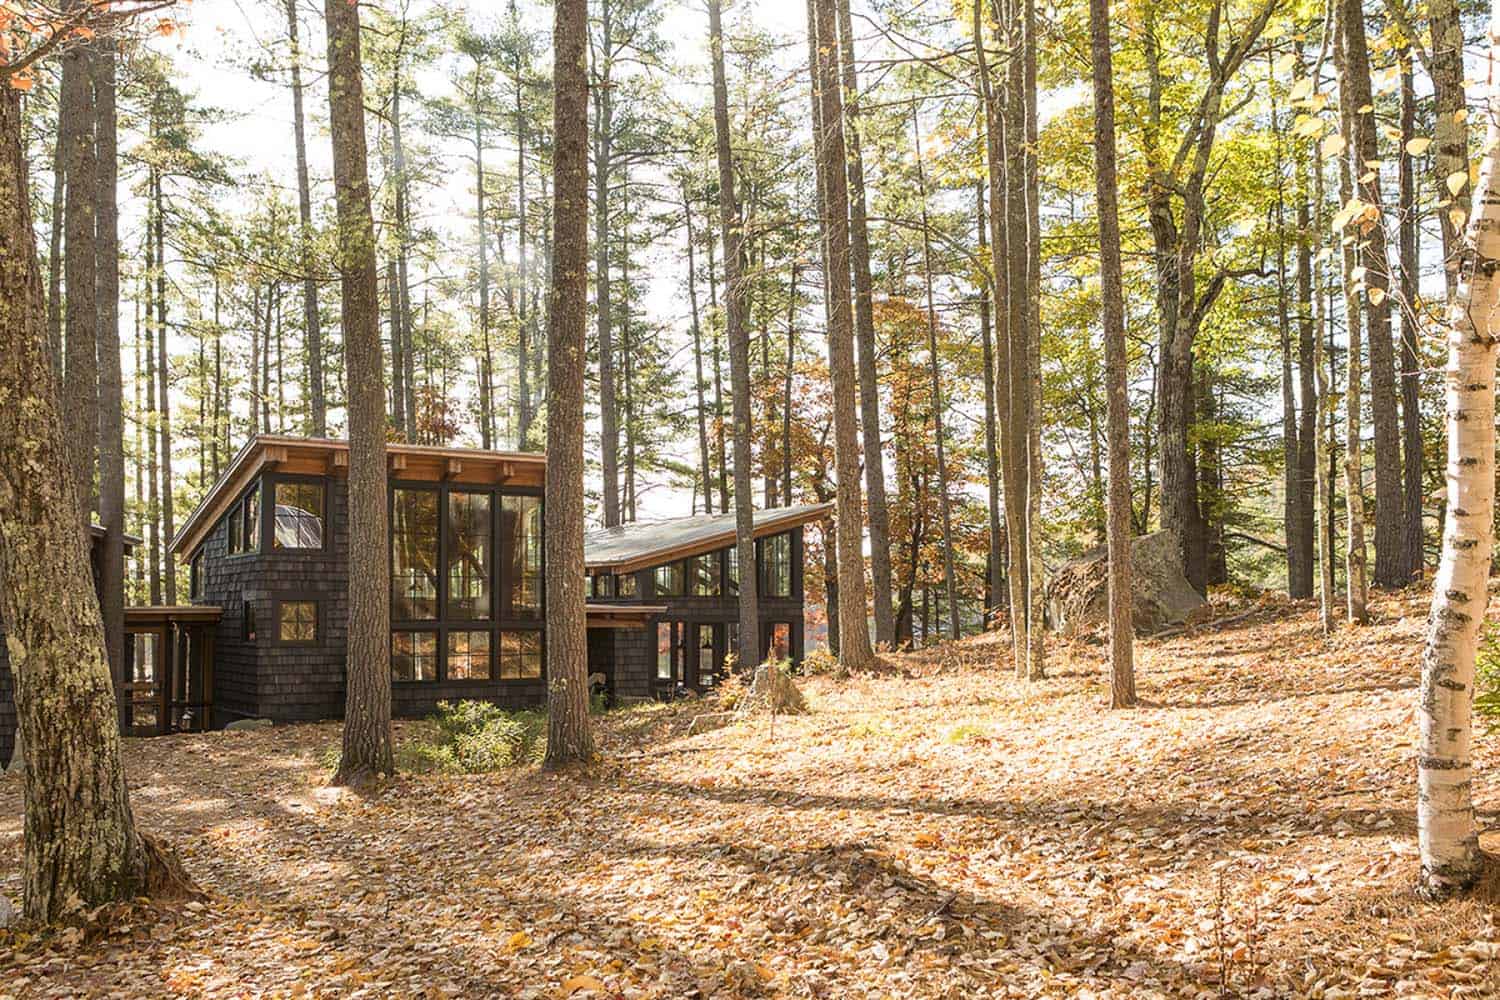 off-the-grid island camp exterior surrounded by woods